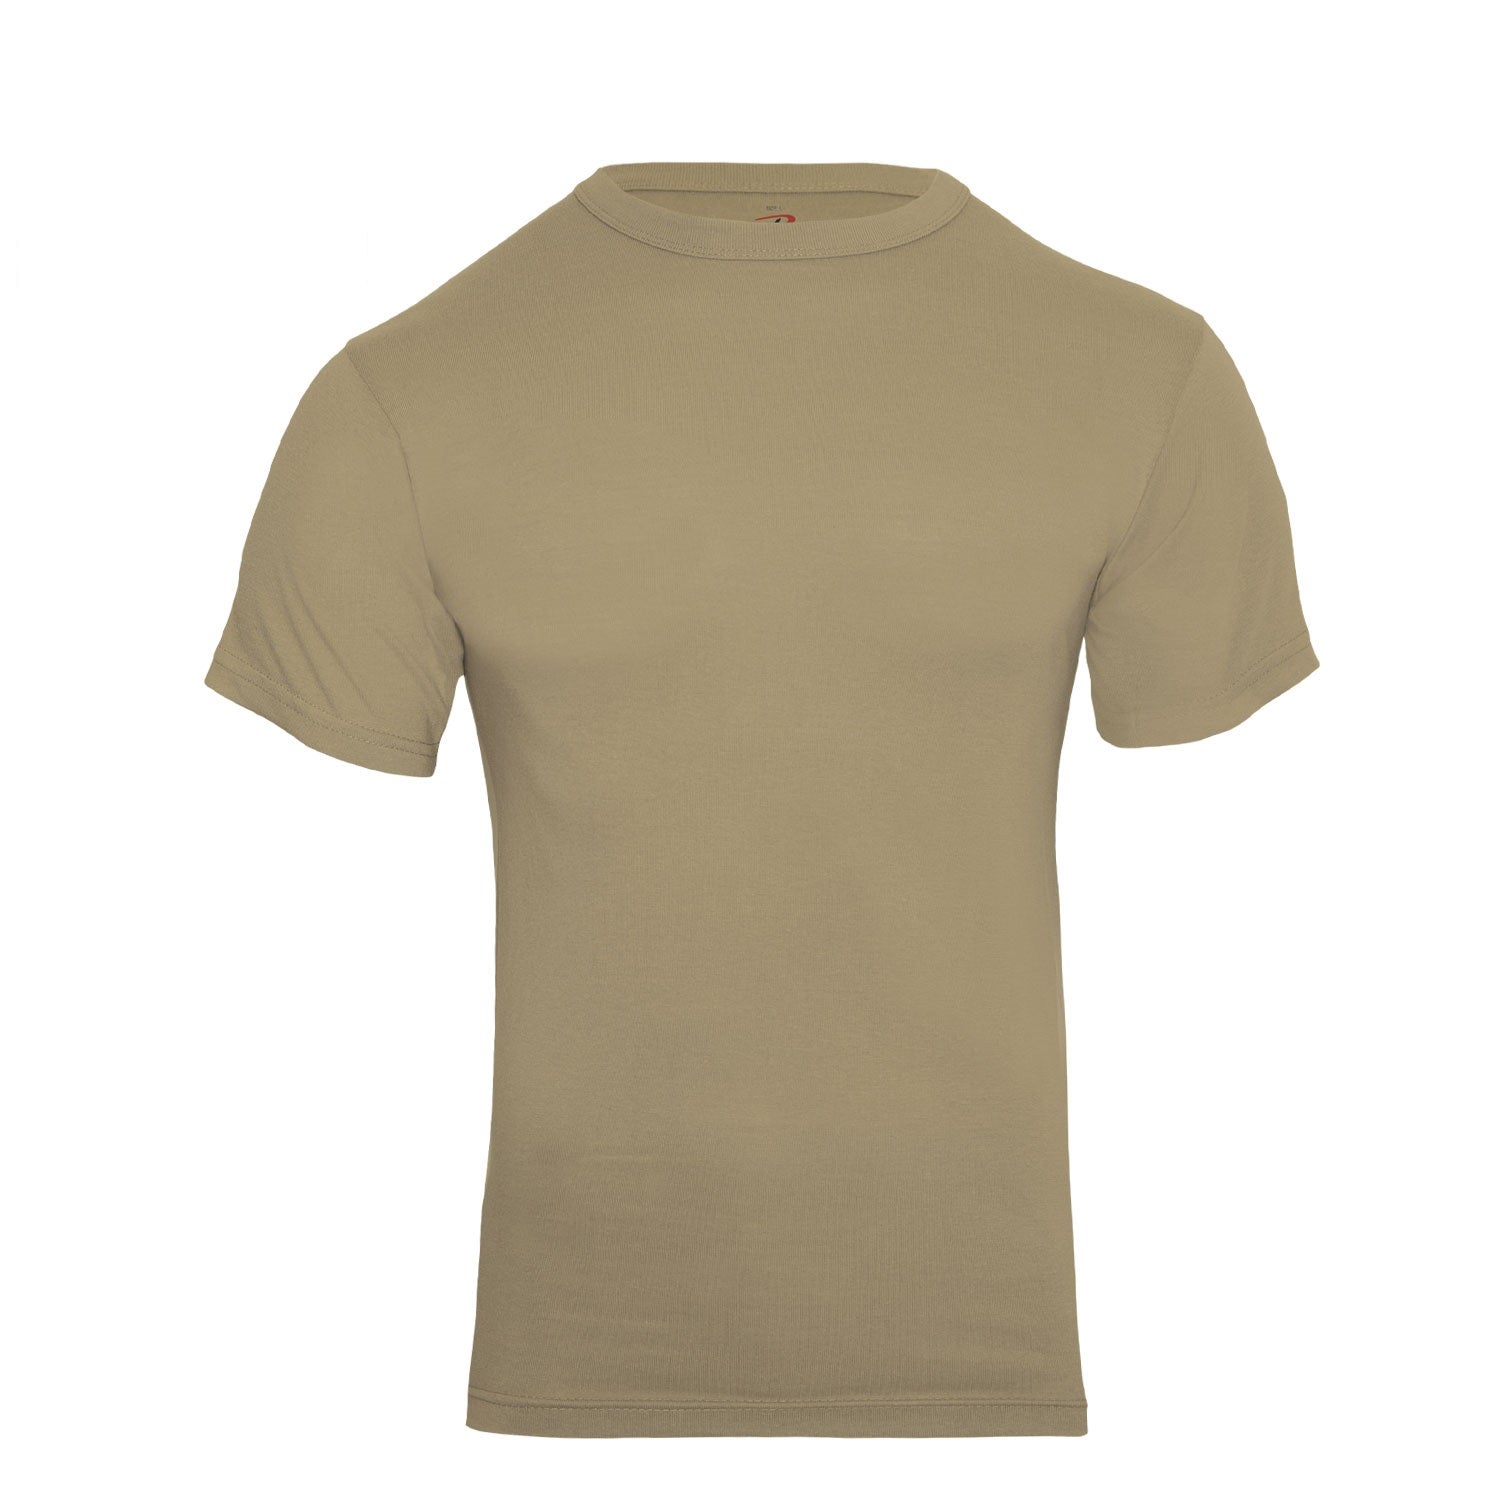 Rothco Solid Color Cotton / Polyester Blend Military T-Shirt Khaki